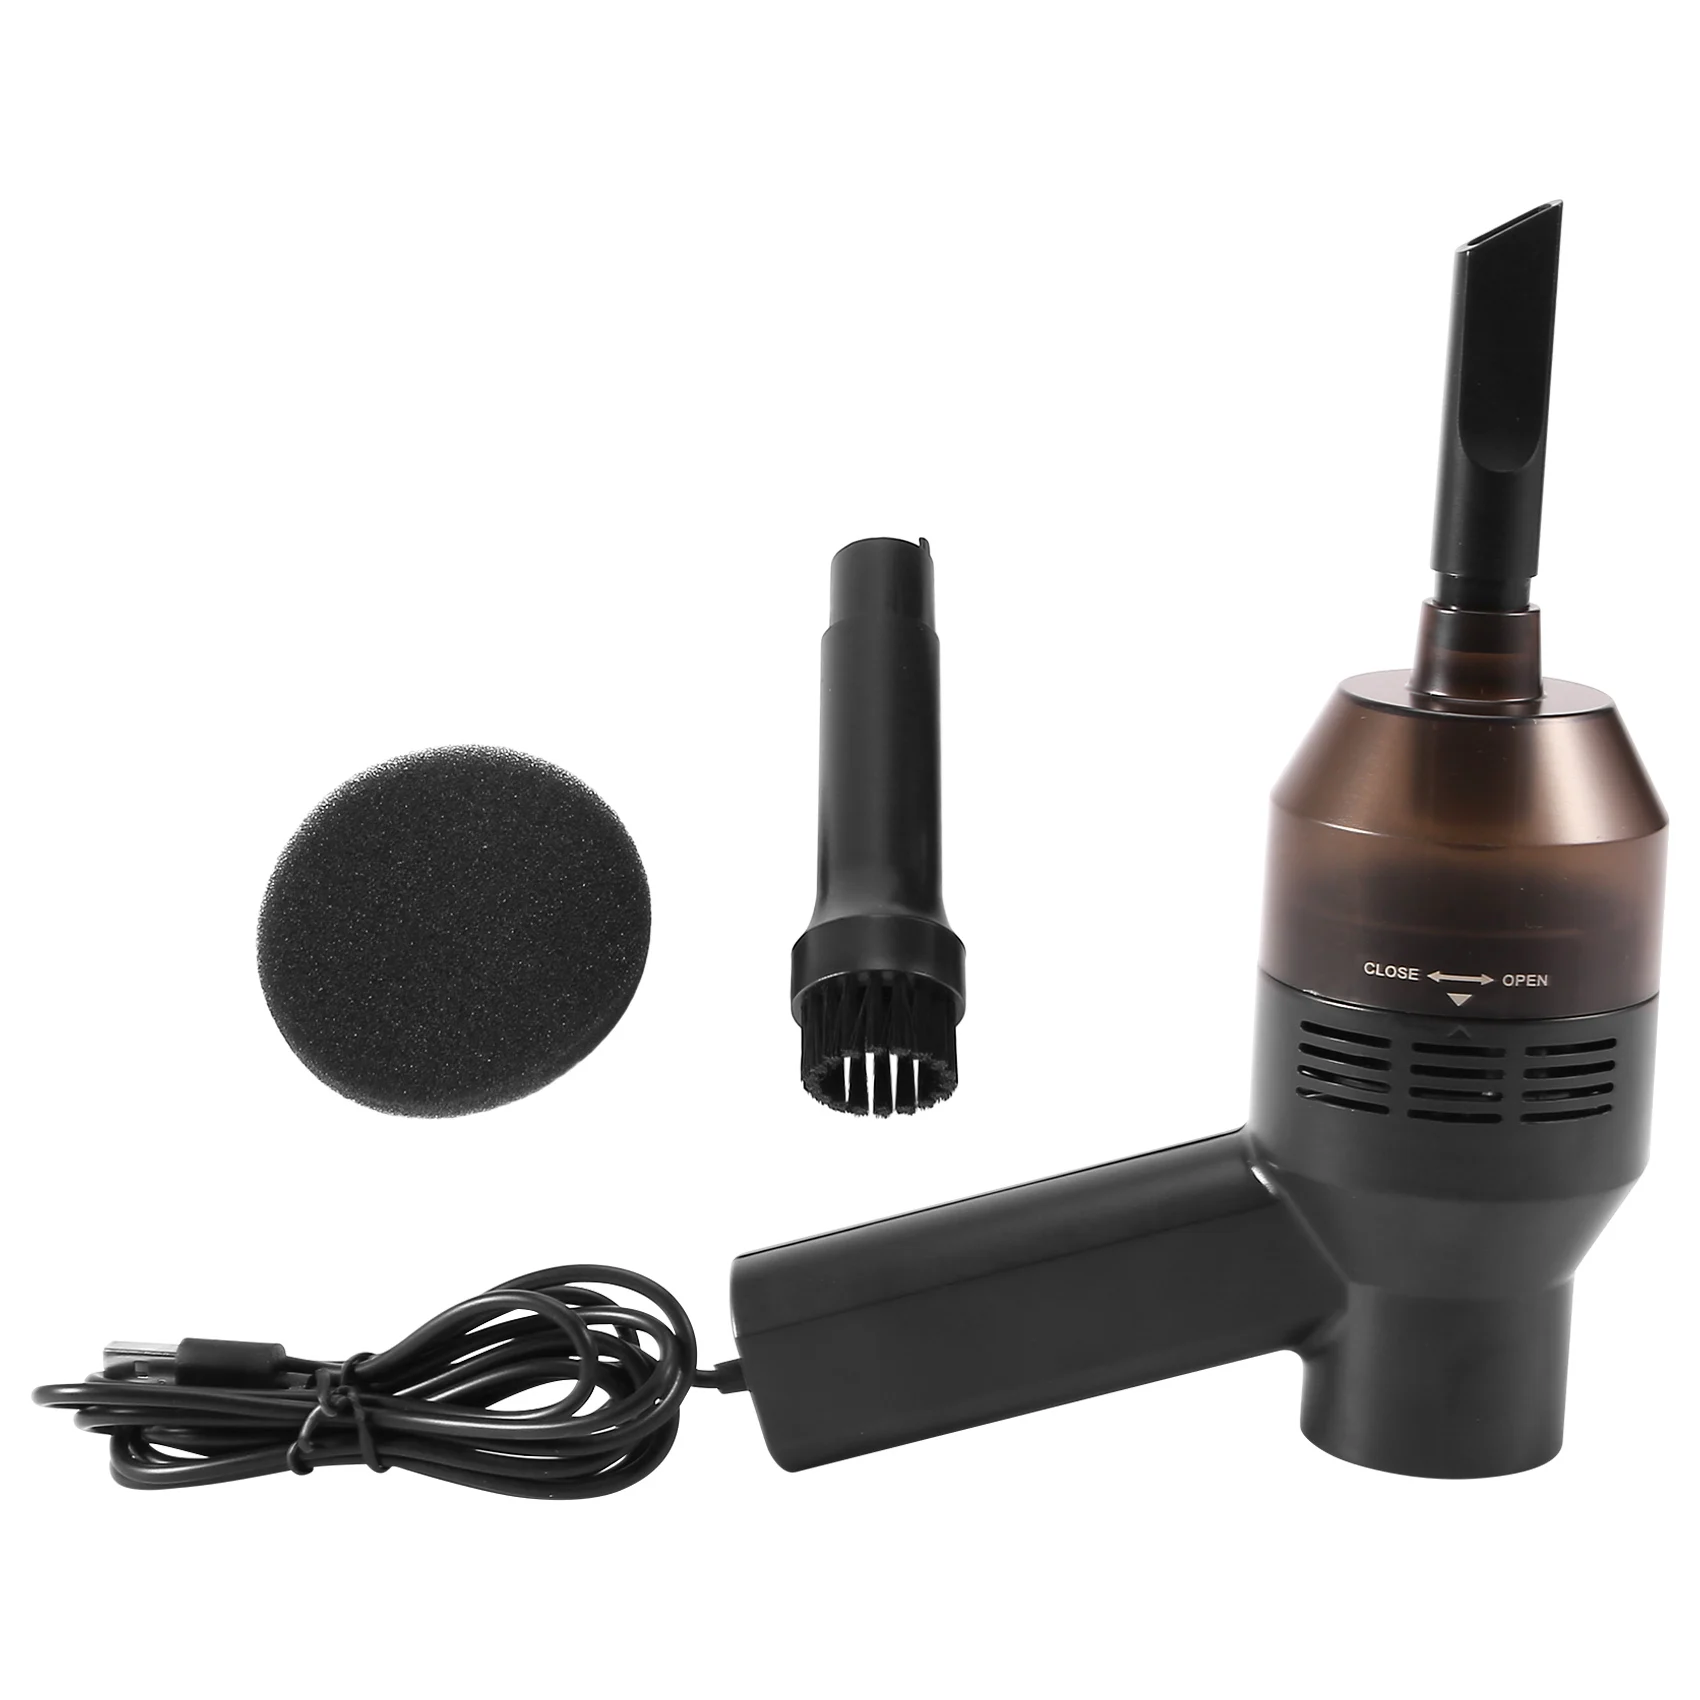 

Keyboard Vacuum Cleaner, USB Mini Vacuum Computer Cleaners,Portables Handheld Vacuum Cleaner Dust Collector for Hairs